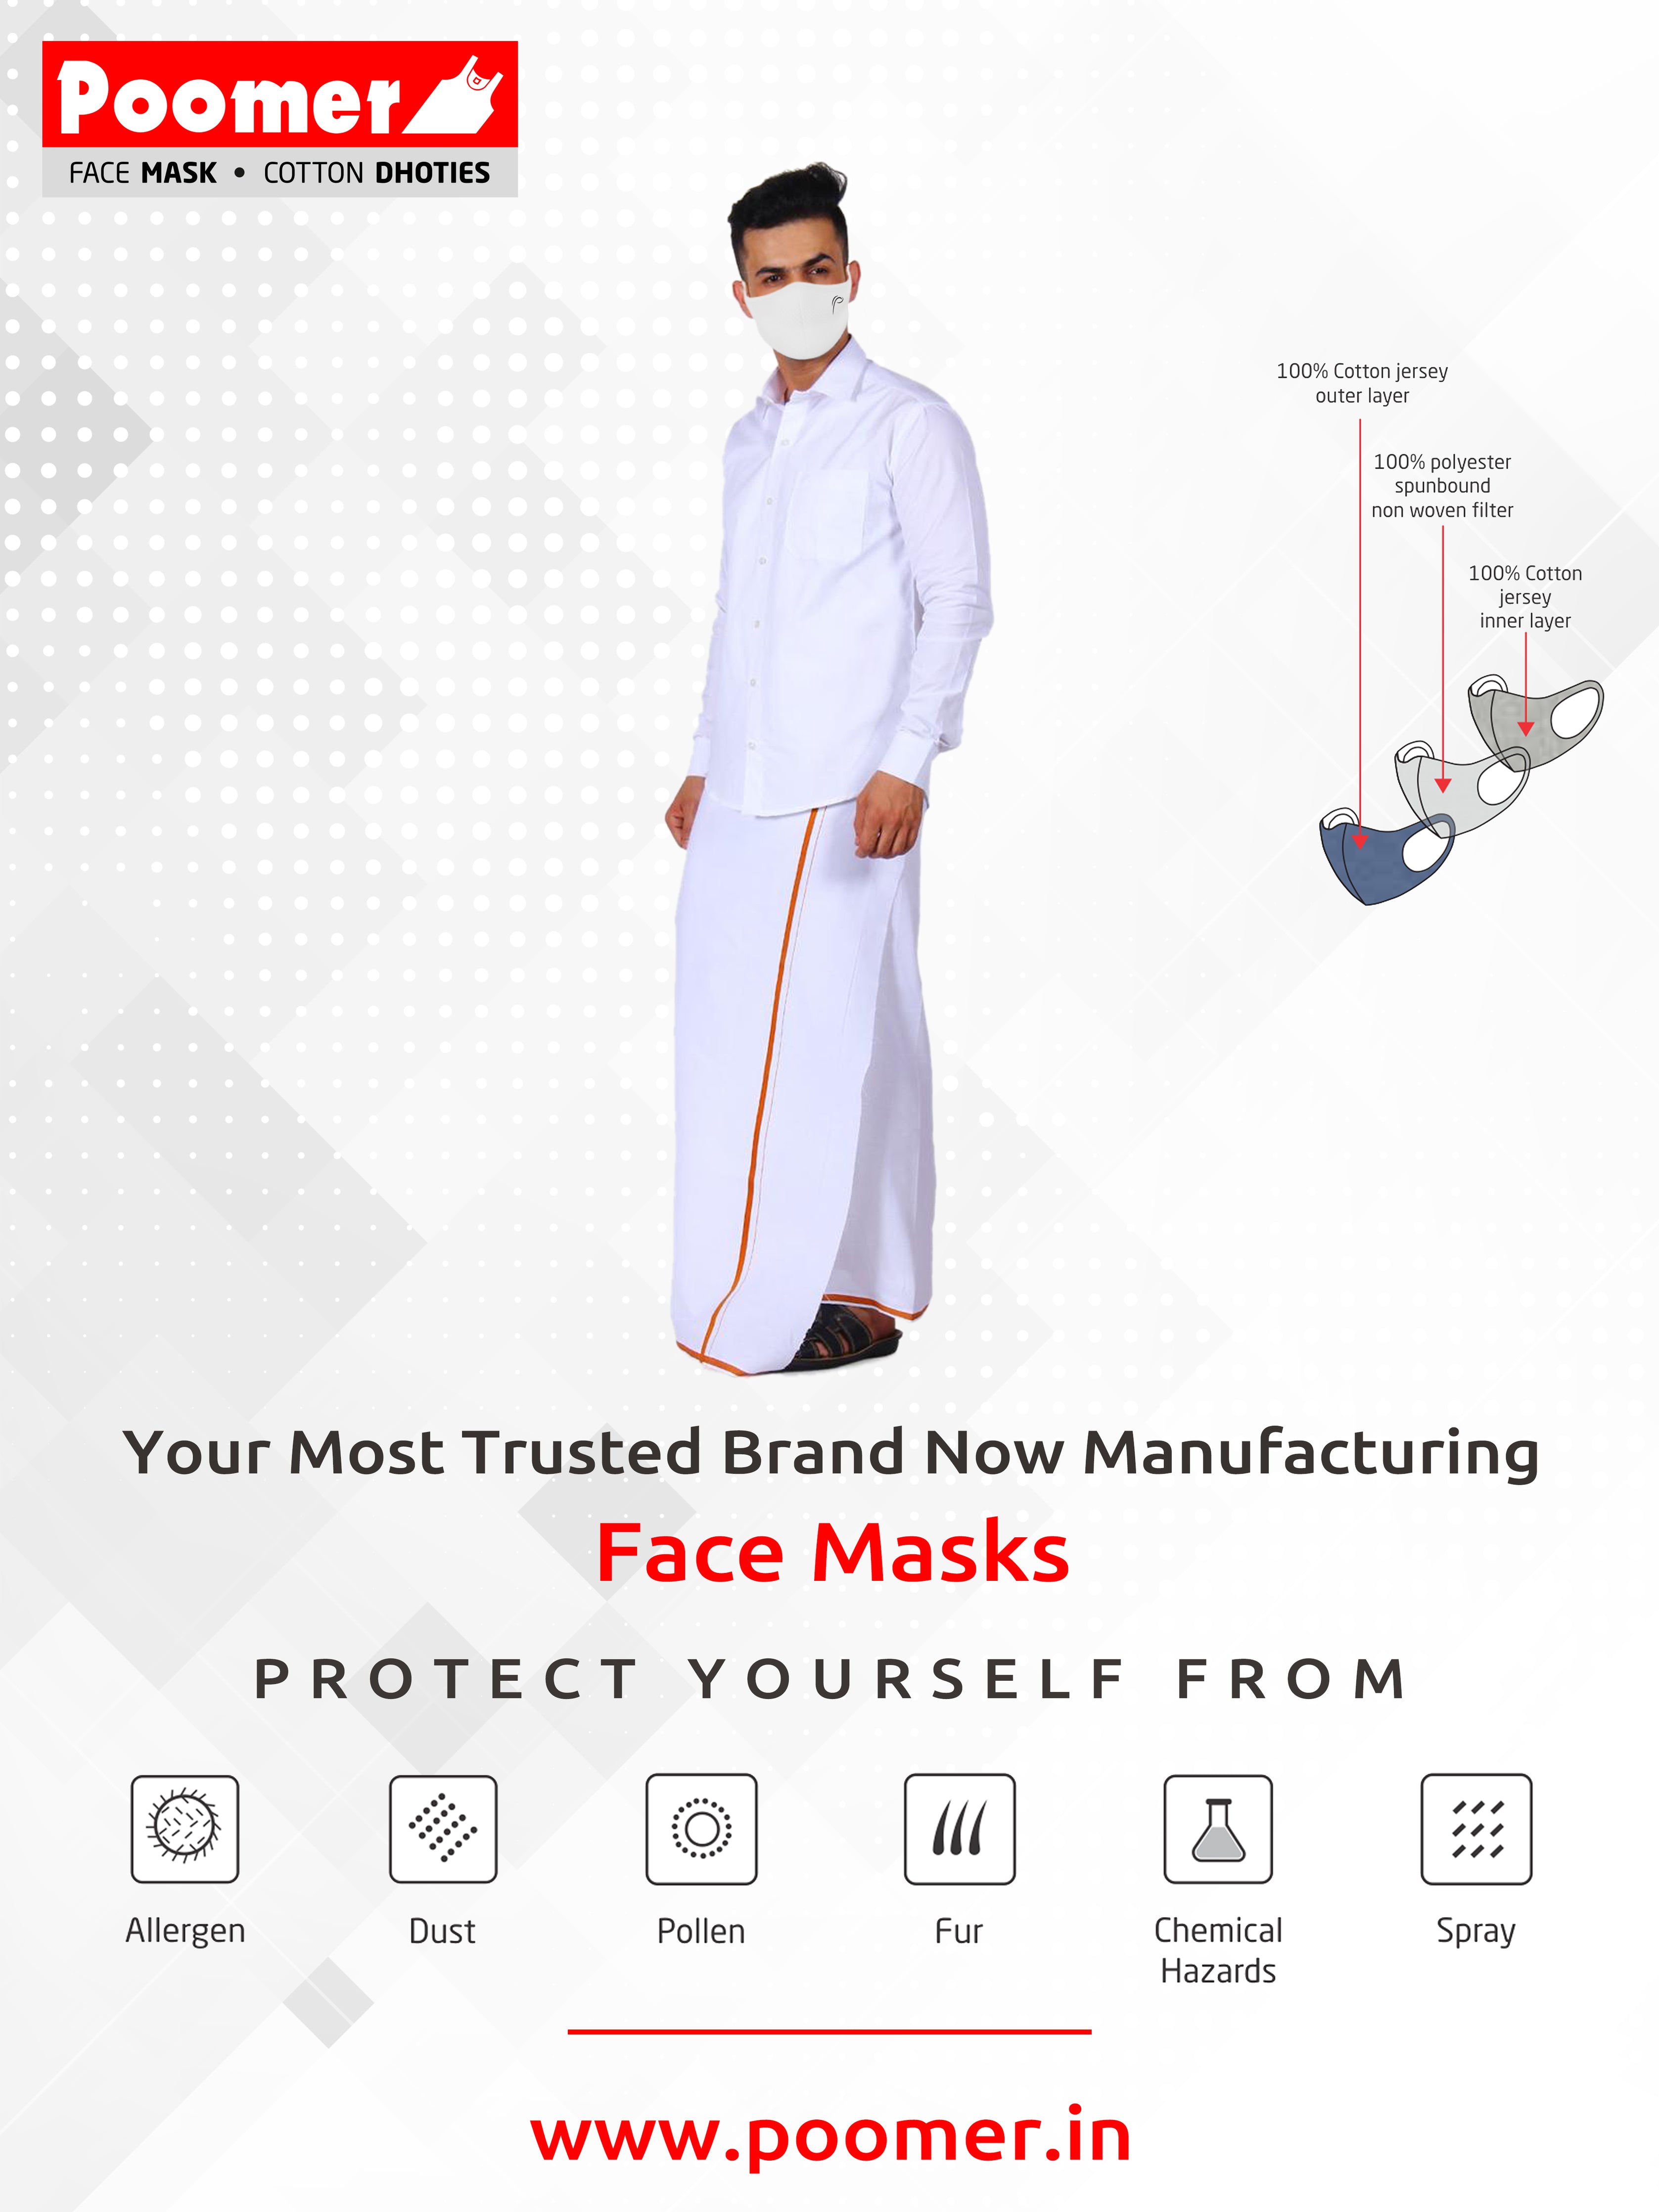 Bright White Poomer Face Mask - 3 layer Anti-Bacterial & Anti-Pollution Face Mask (Pack of 3)